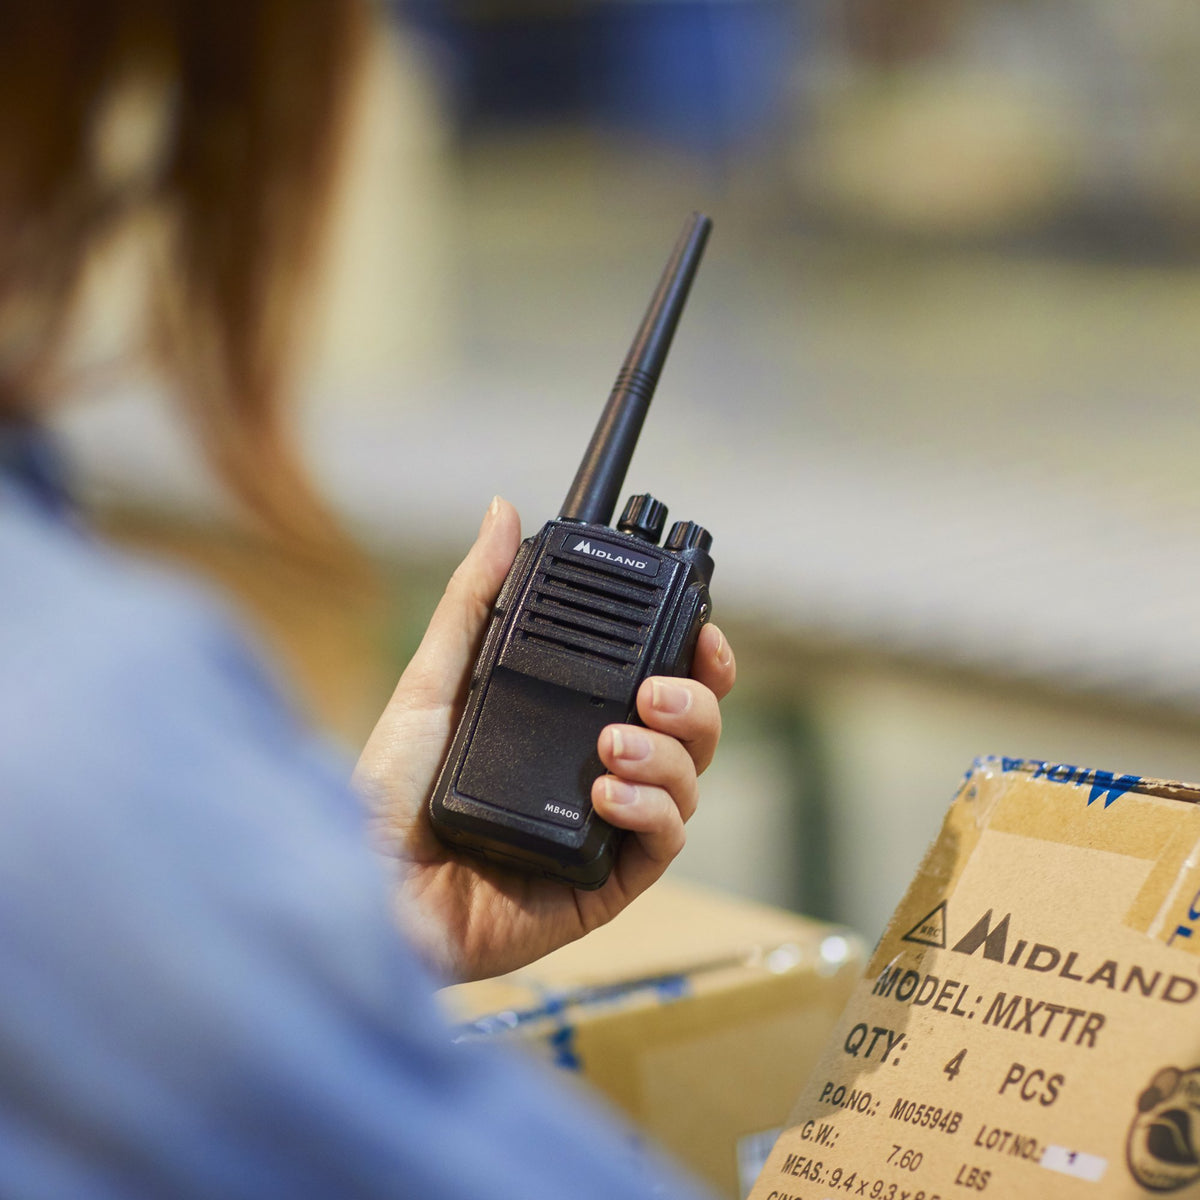 Midland MB400 Business Two-Way Radio Easy to Program Long-Range 16  Channels Coverage for up to a 350,000 Square Foot Warehouse Construction Ho 